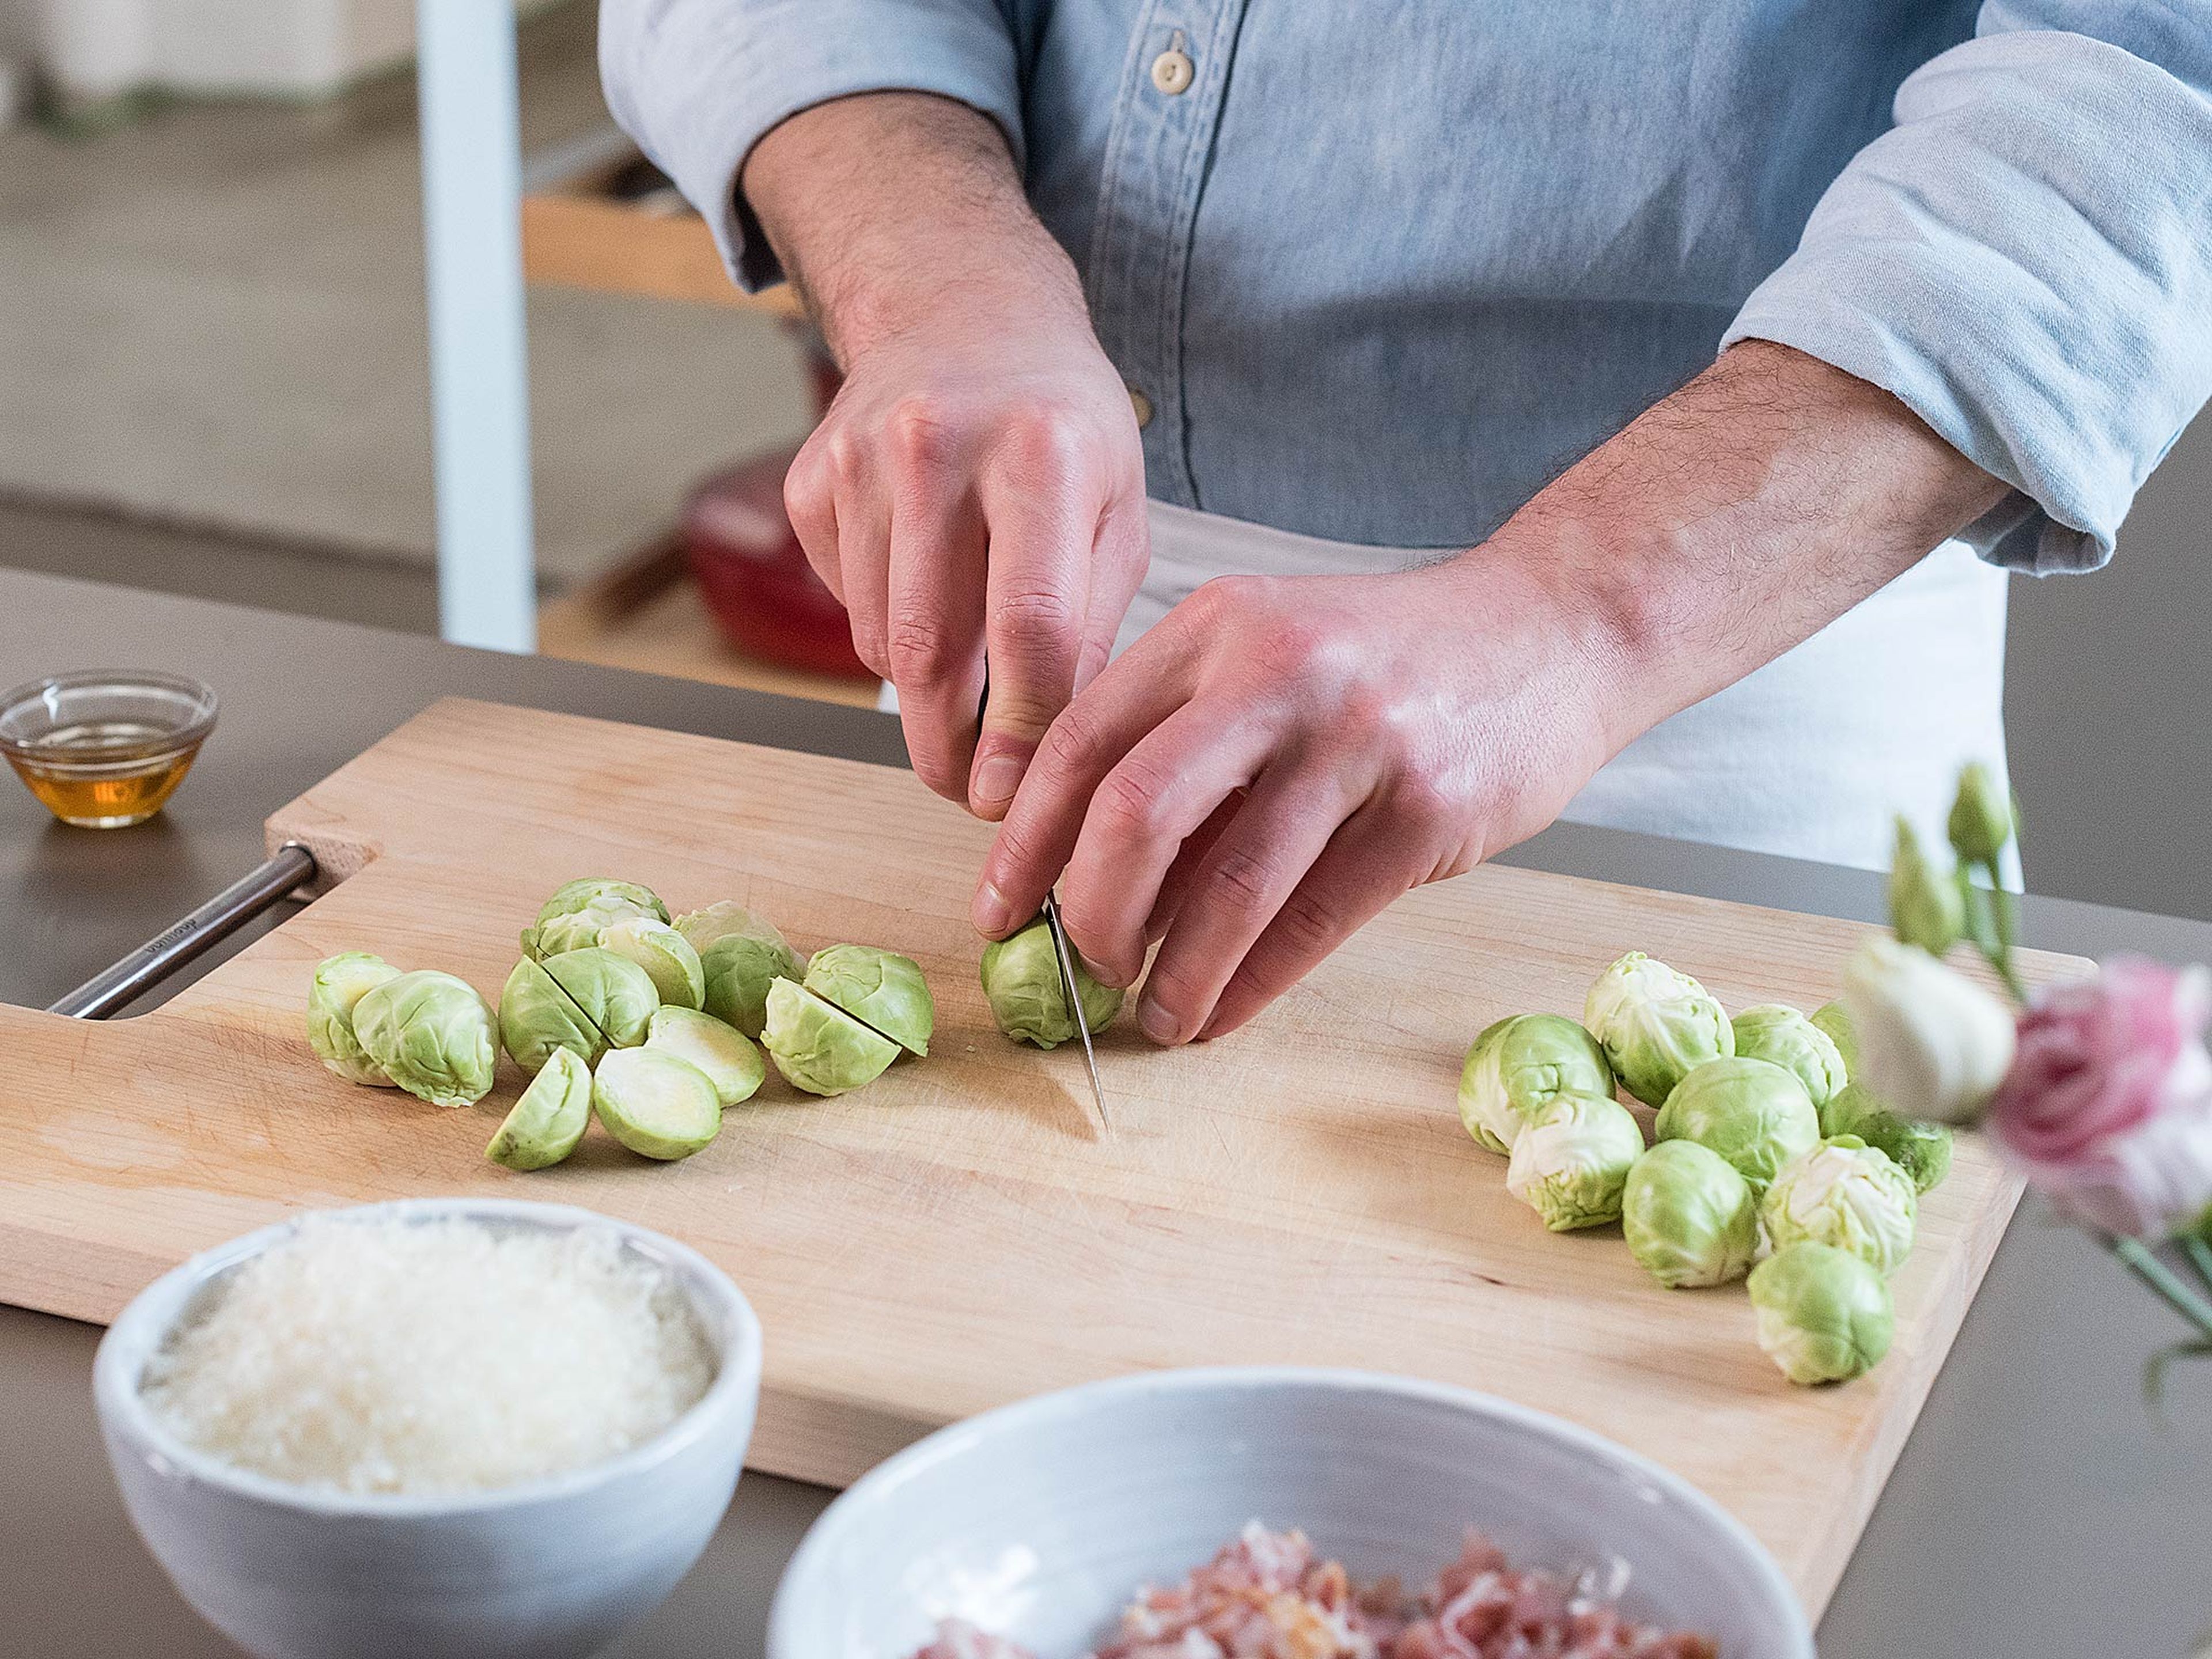 Bring large pot of salted water to a boil. Add pasta and cook for approx. 8 min., or until al dente, according to package instructions. Meanwhile, clean and peel outside leaves from Brussels sprouts, then halve.